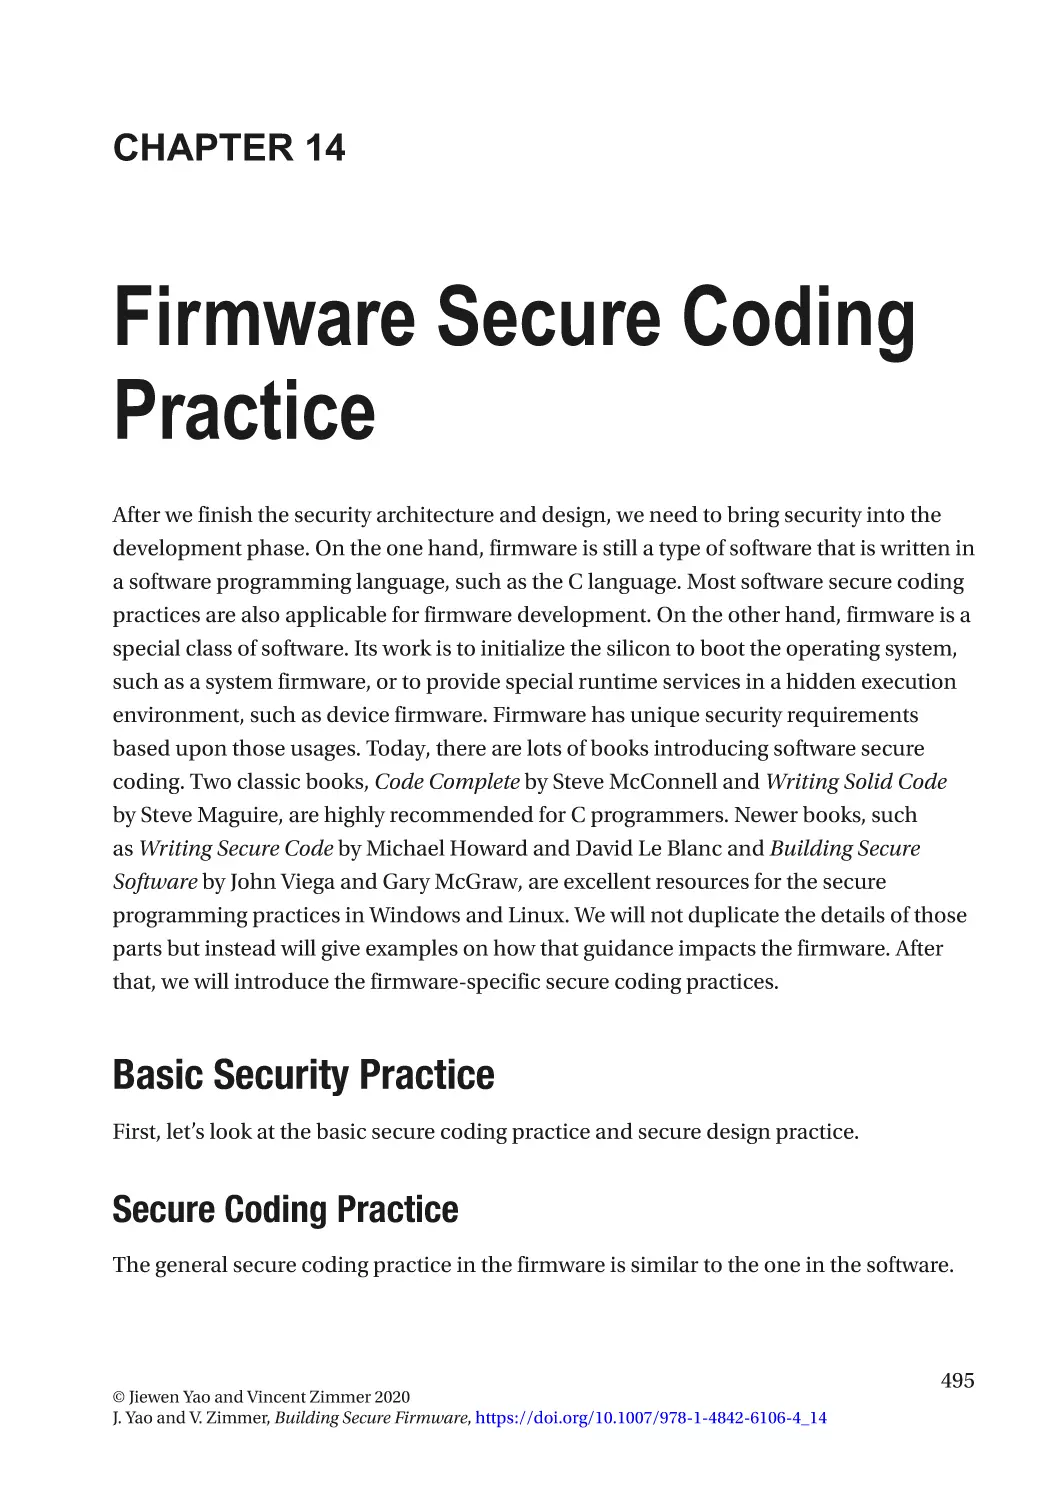 Chapter 14
Basic Security Practice
Secure Coding Practice